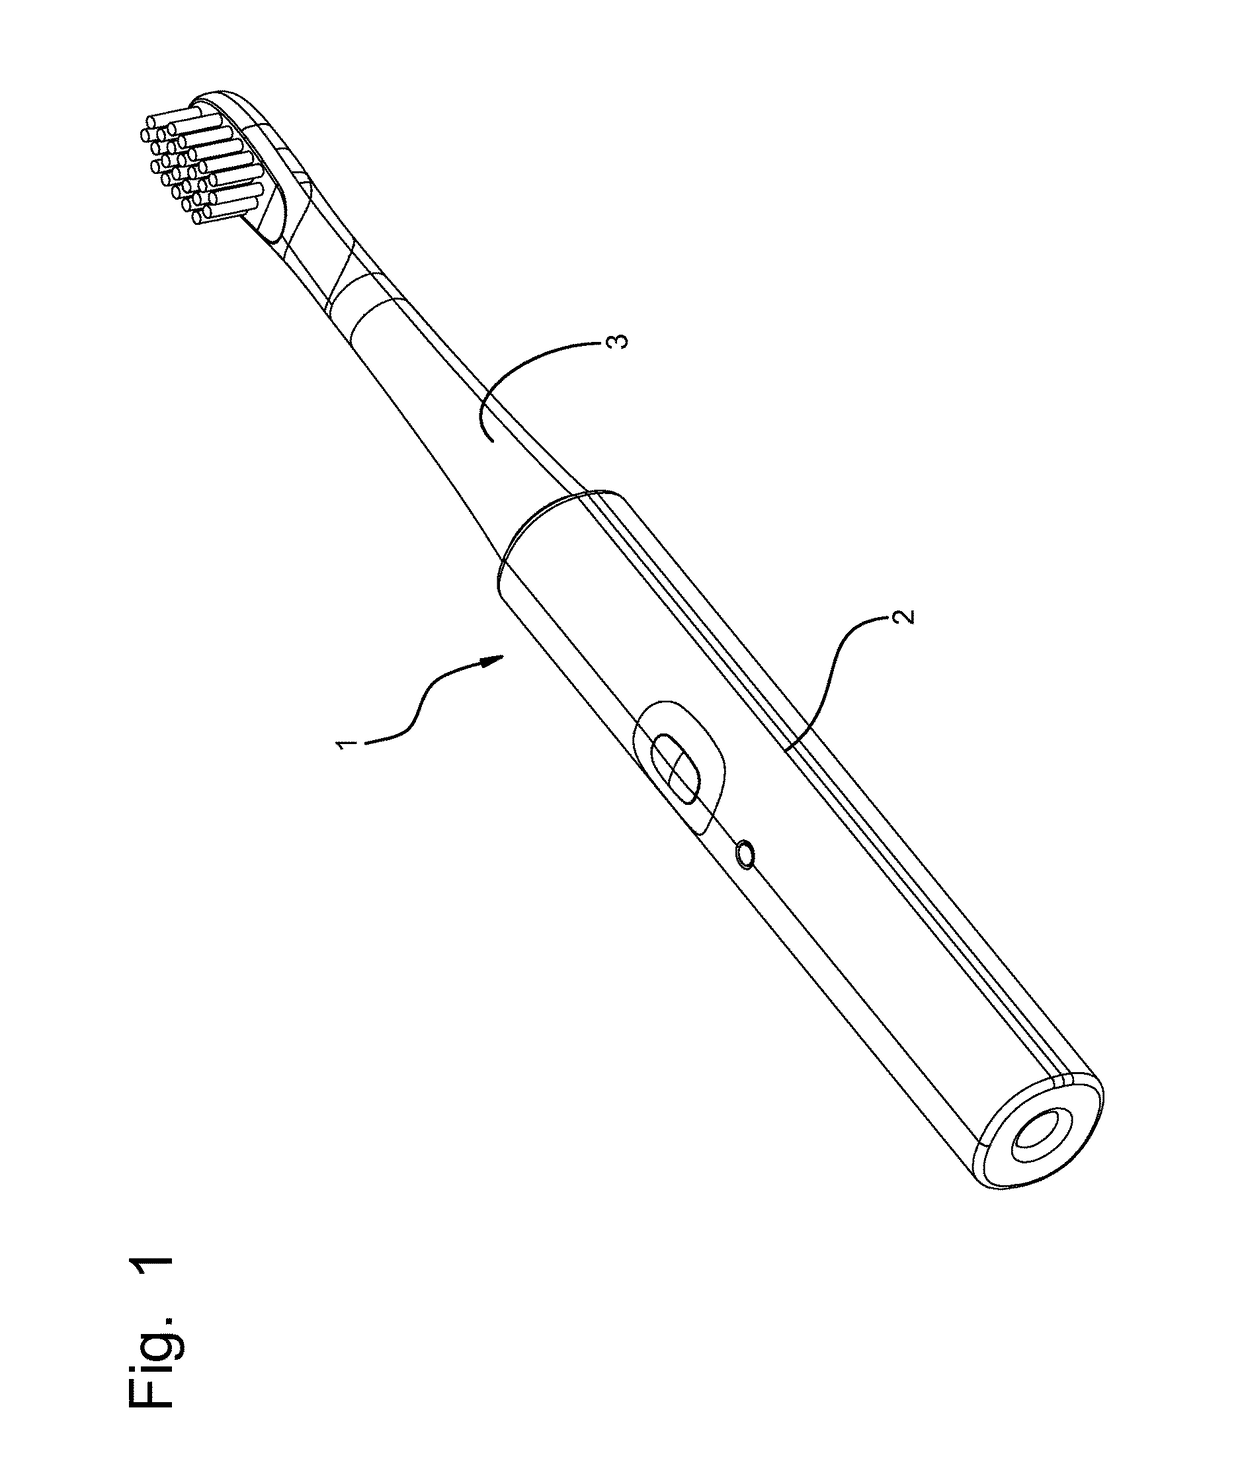 Electric Toothbrush with a Rechargeable Battery, and Inductance Charger Apparatus for Use with the Same